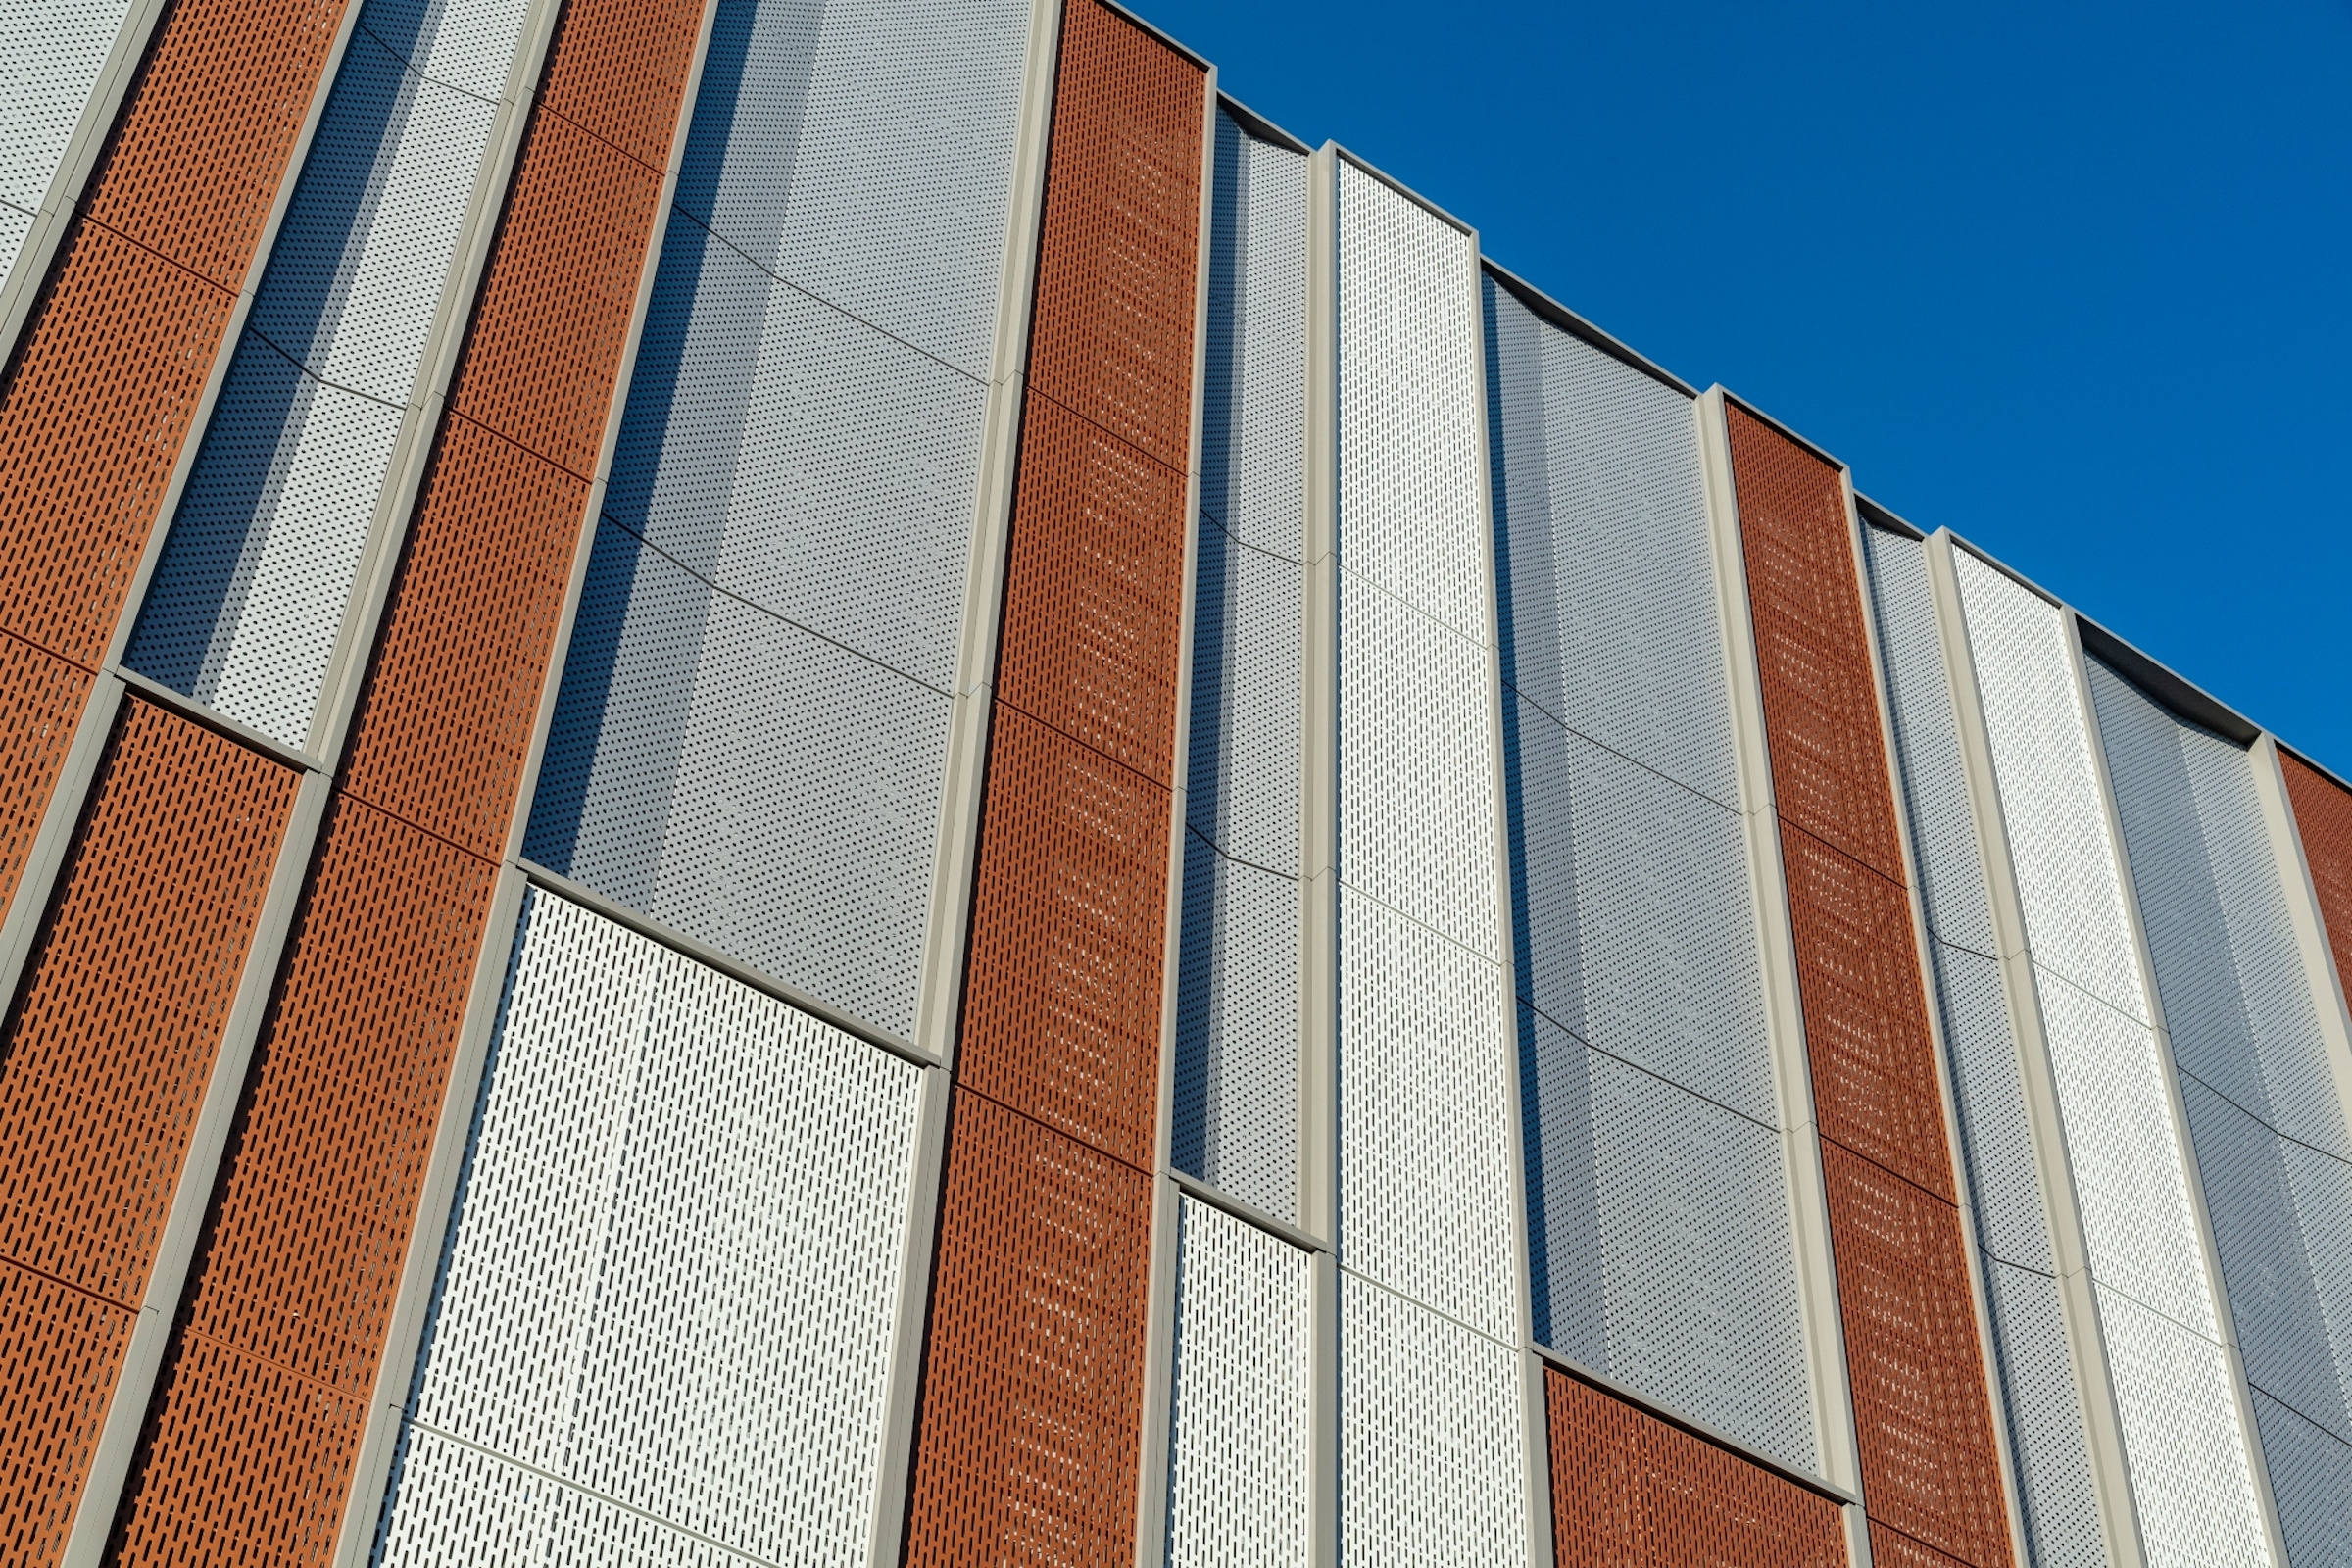 Metal cladding trends and innovations AIA course BDCuniversity February 2023 hood5_courtesyMetalwerks